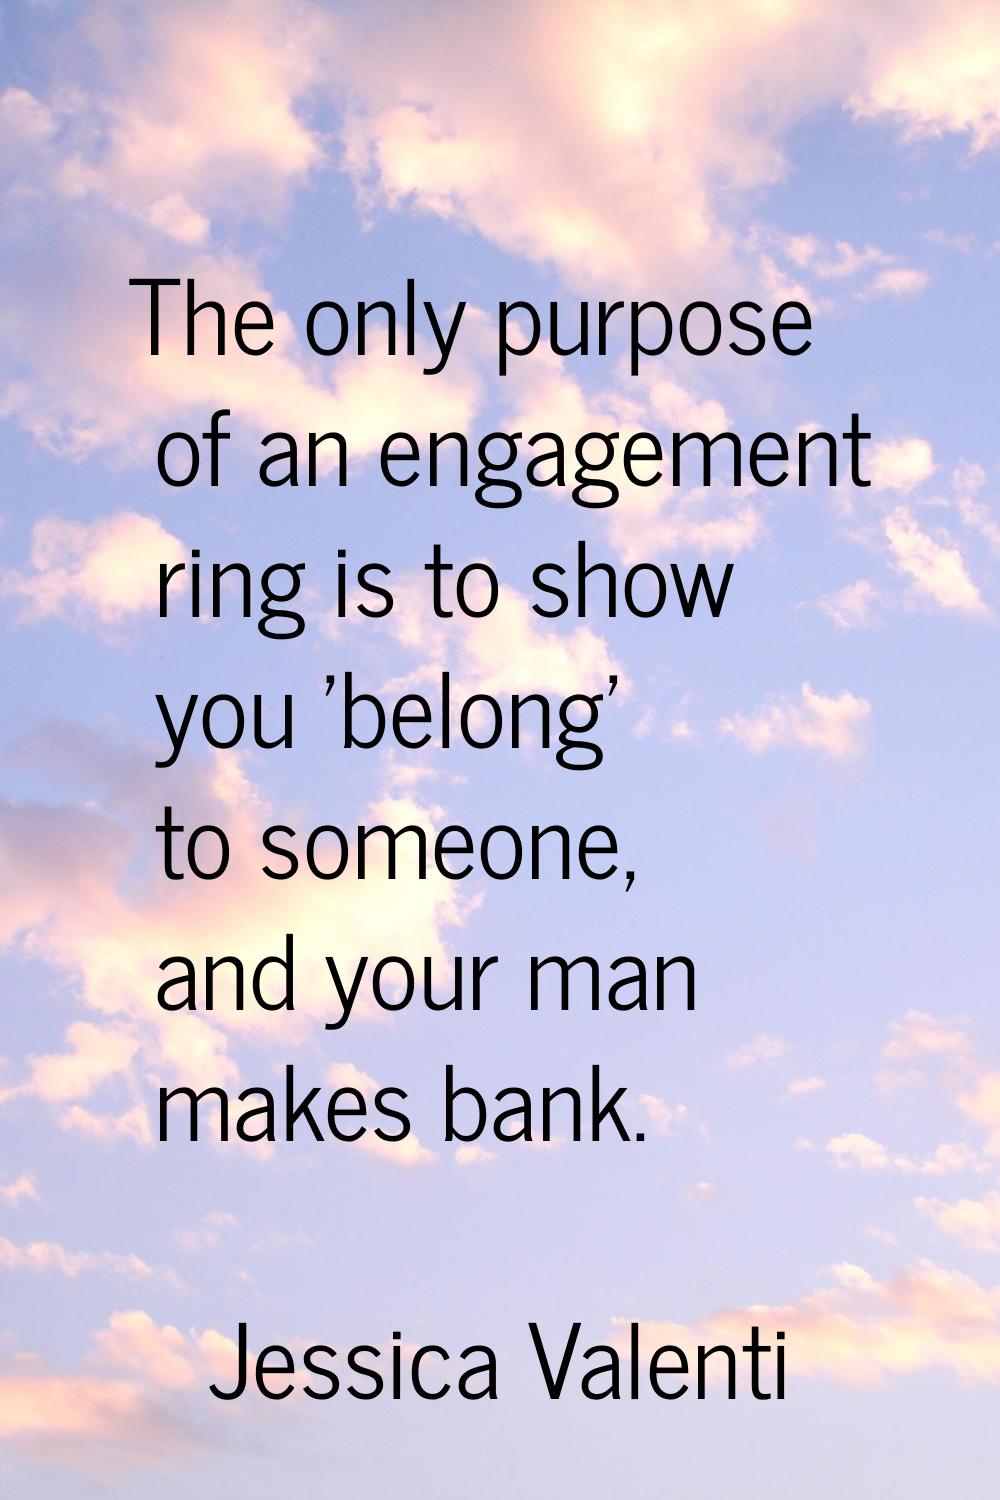 The only purpose of an engagement ring is to show you 'belong' to someone, and your man makes bank.